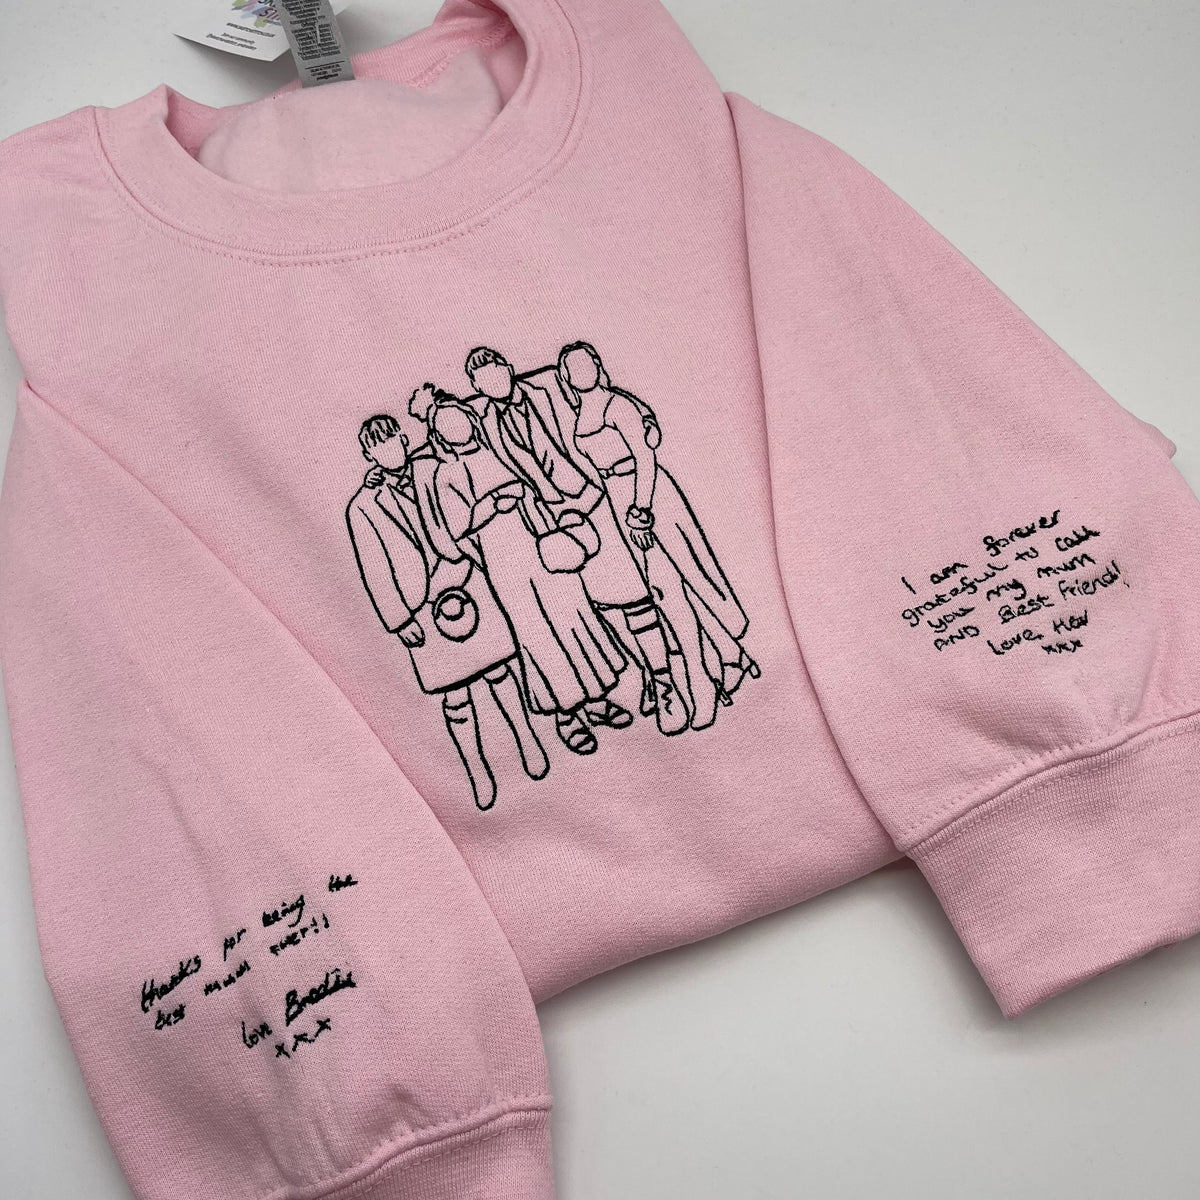 Pink Personalised Outline Stitch Sweatshirt. anniversary gifts for him wedding anniversary gifts, anniversary gifts for her